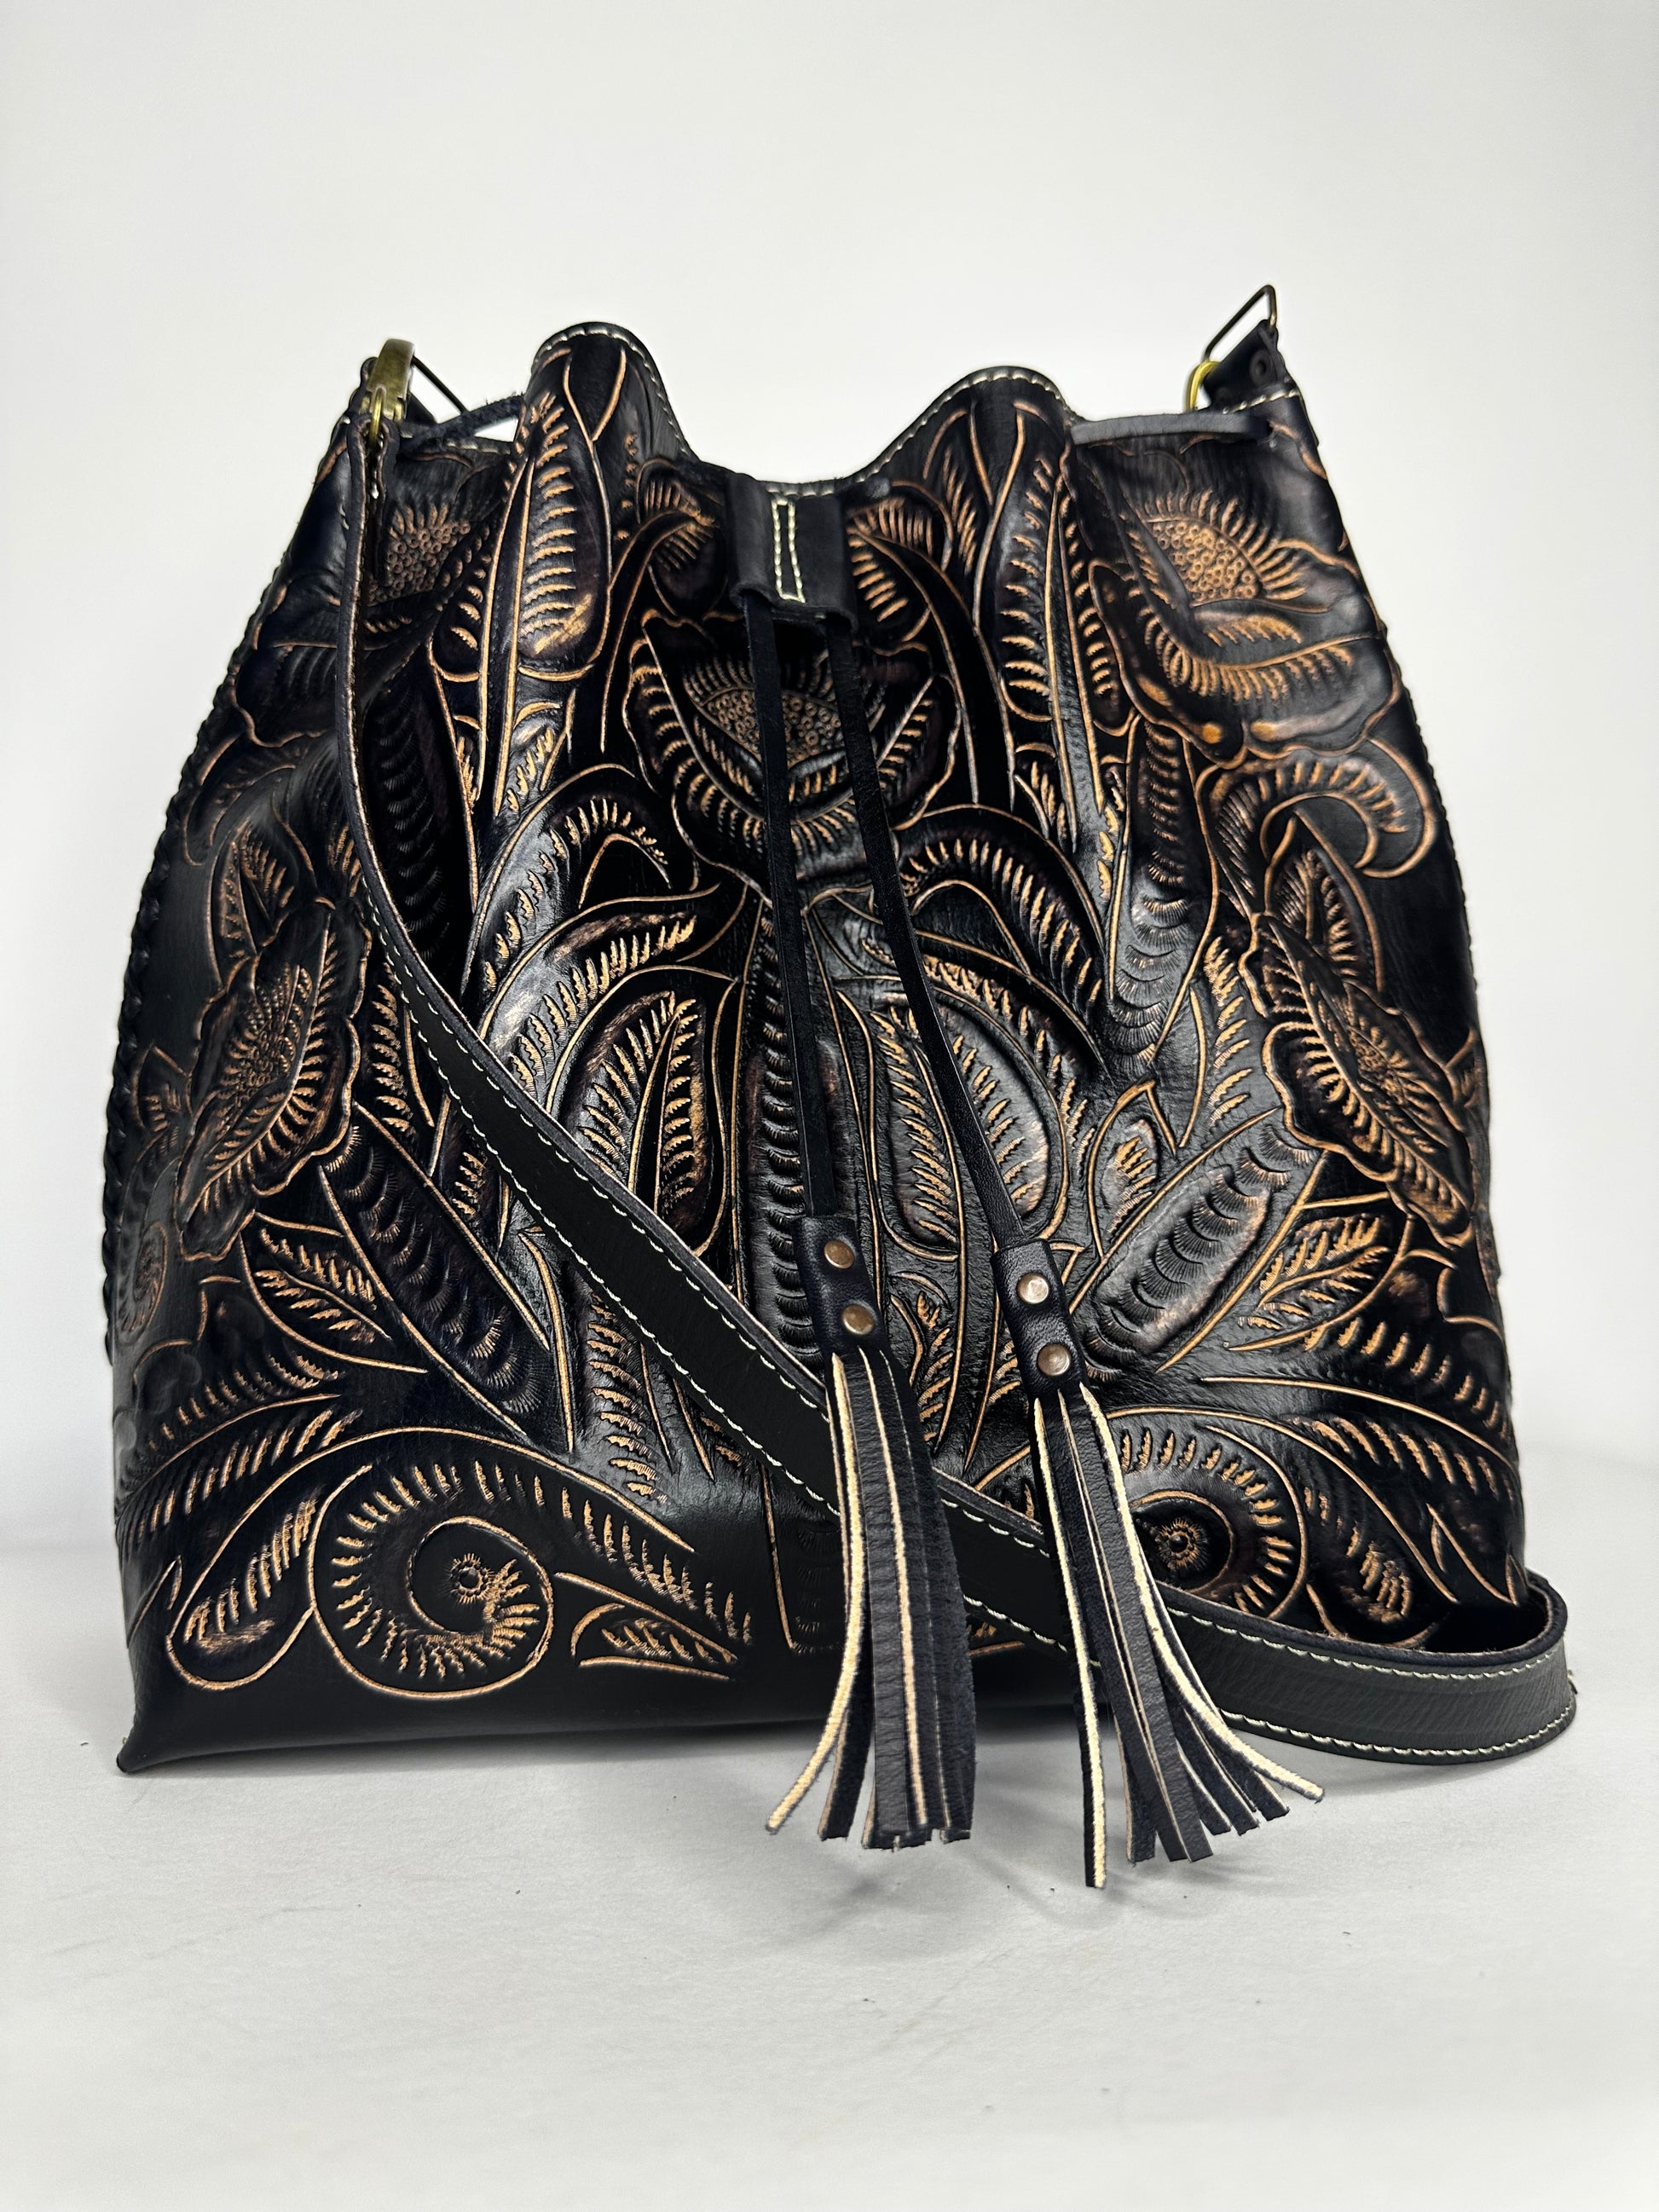 Mexican leather backpack with contrasting hand etched design throughout bag. Has one strap for crossbody capability and leather ties in front to close. Color black and white. 